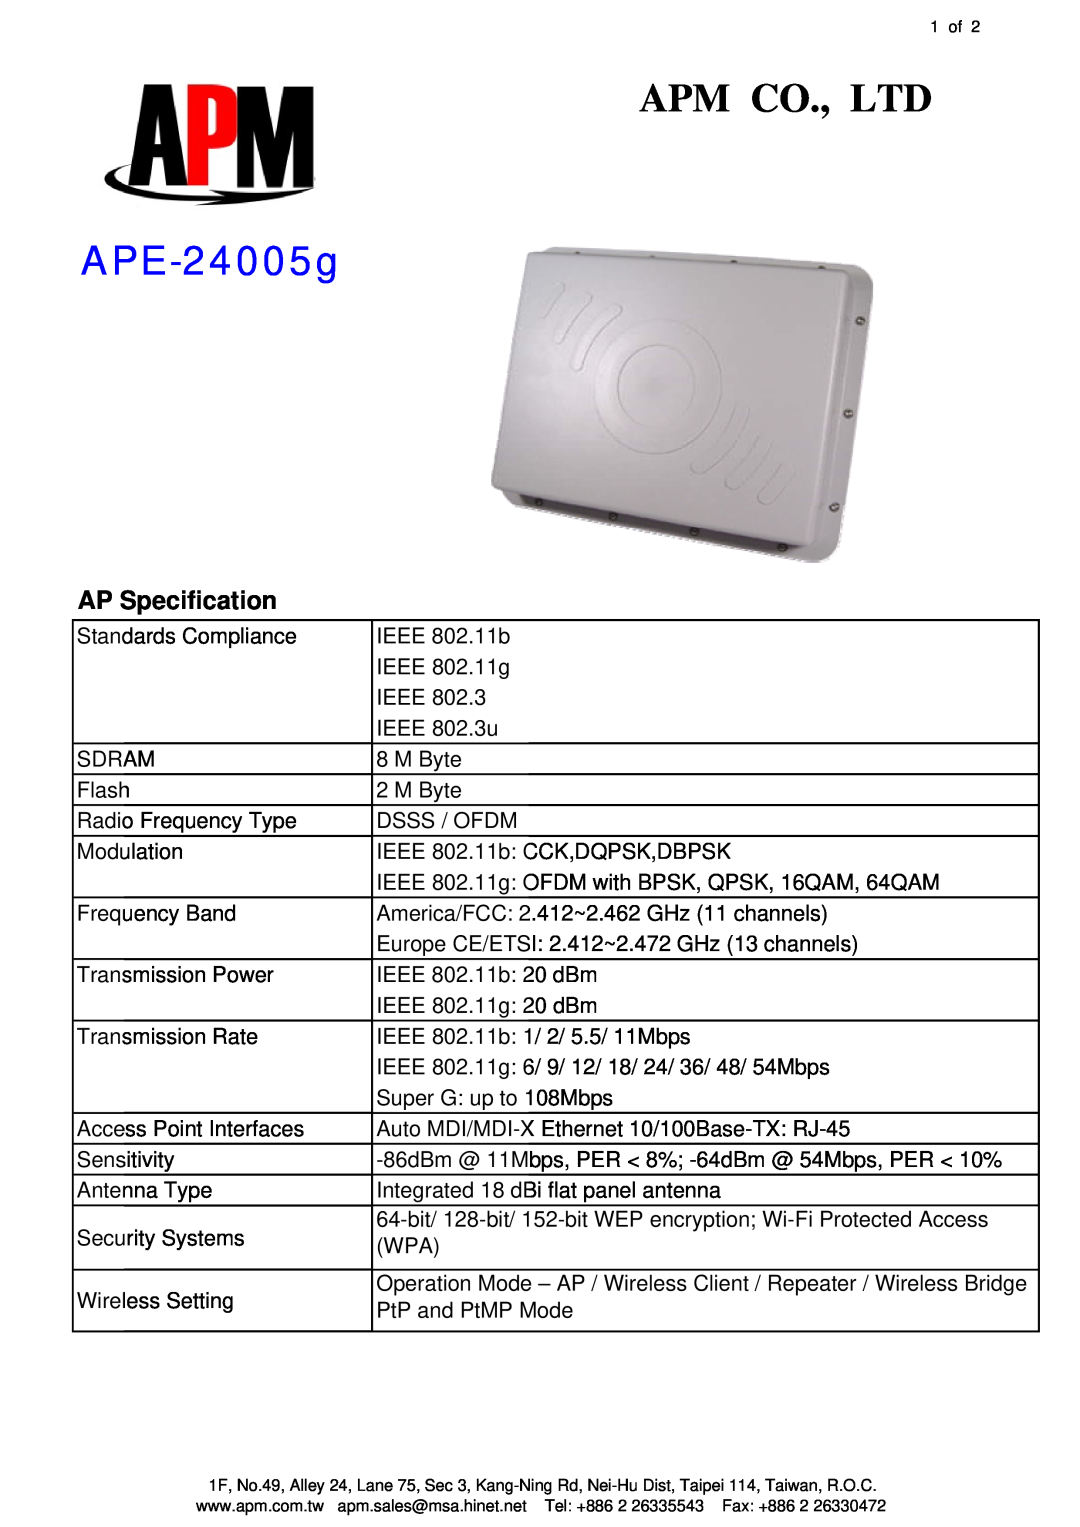 APM APE-24005g specifications AP Specification 